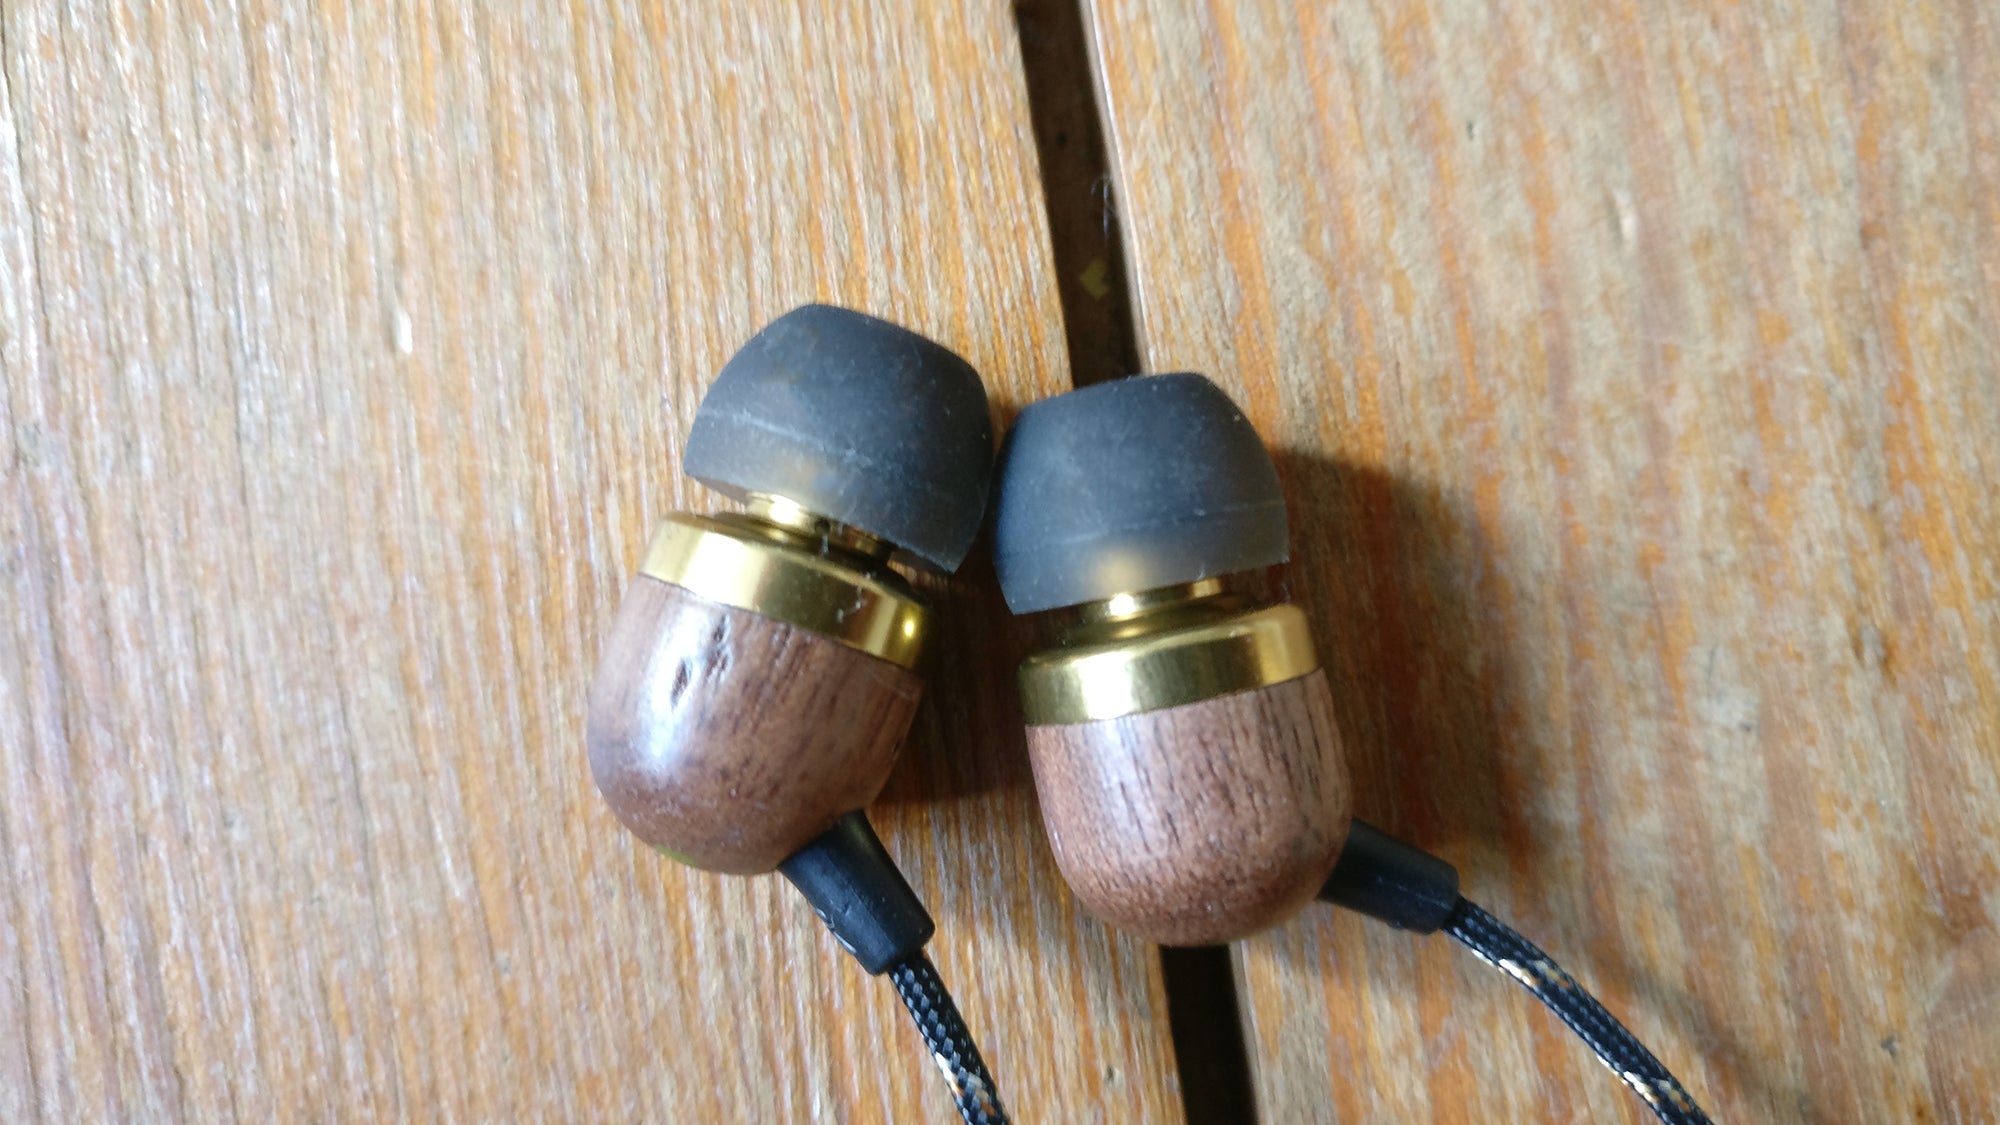 House of Marley Smile Jamaica Wireless earbuds on wooden surface.